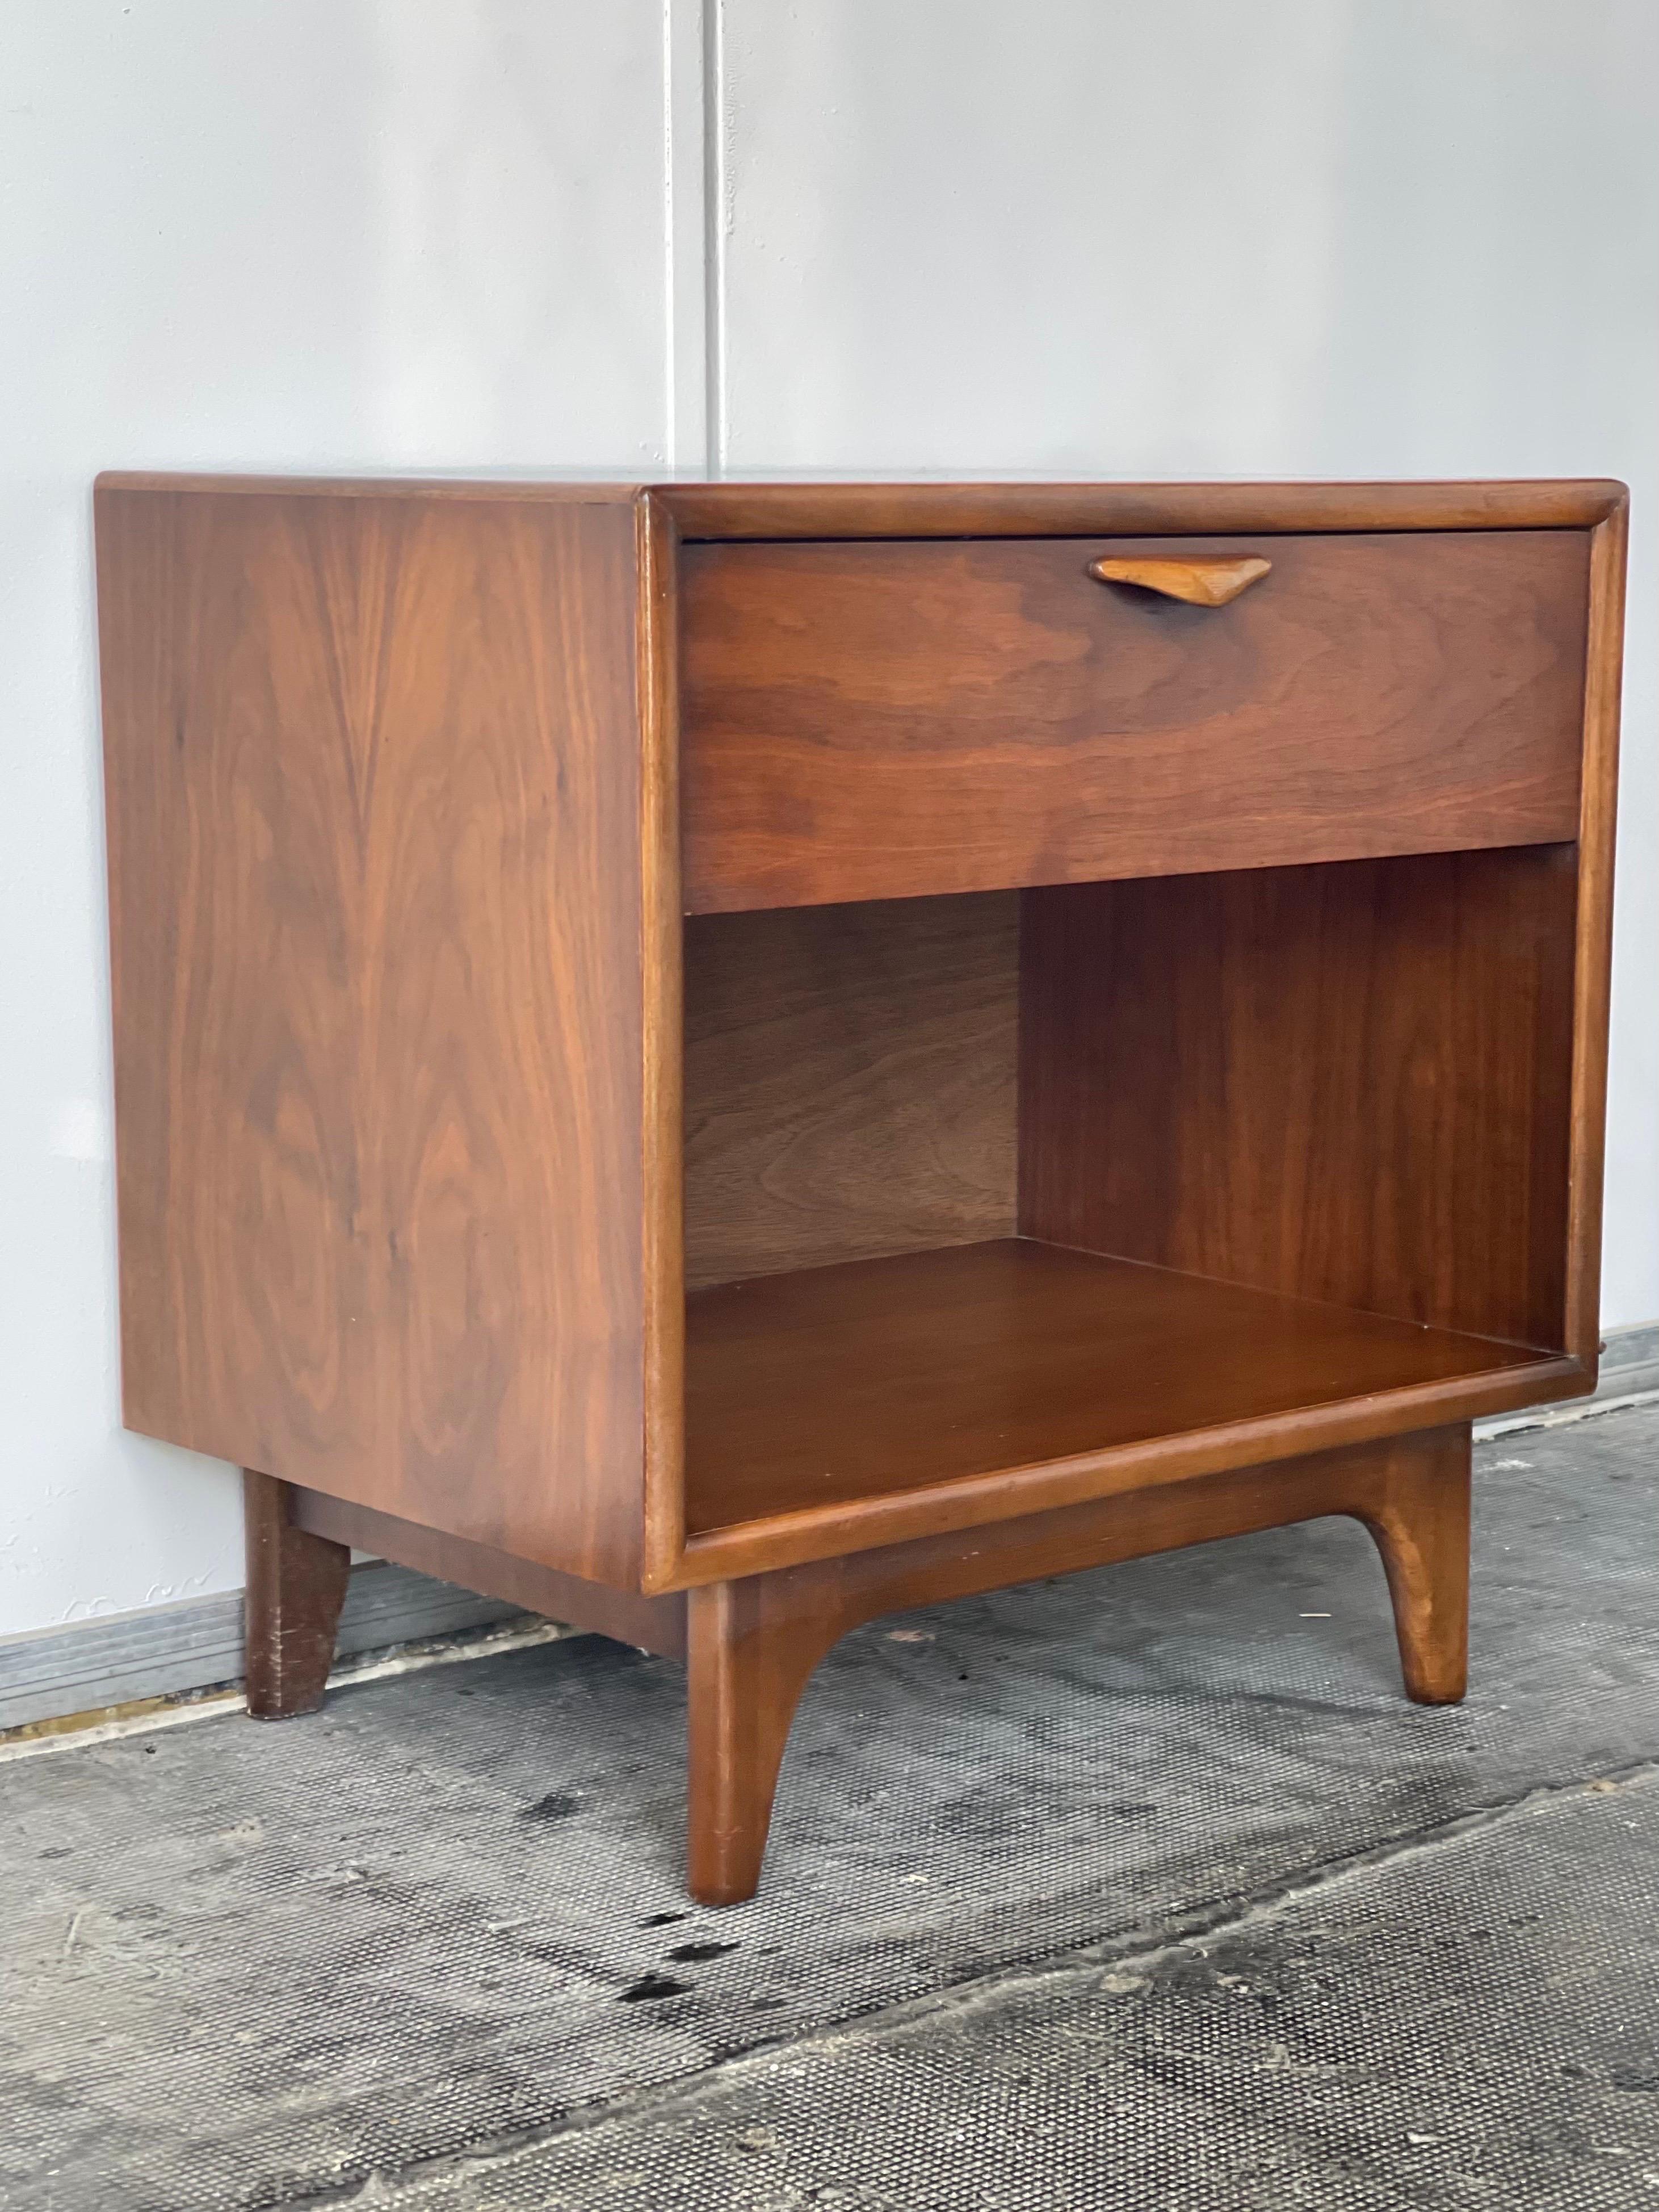 Late 20th Century Vintage Mid-Century Modern Walnut End Table Set. Dovetail Drawers by Lane For Sale